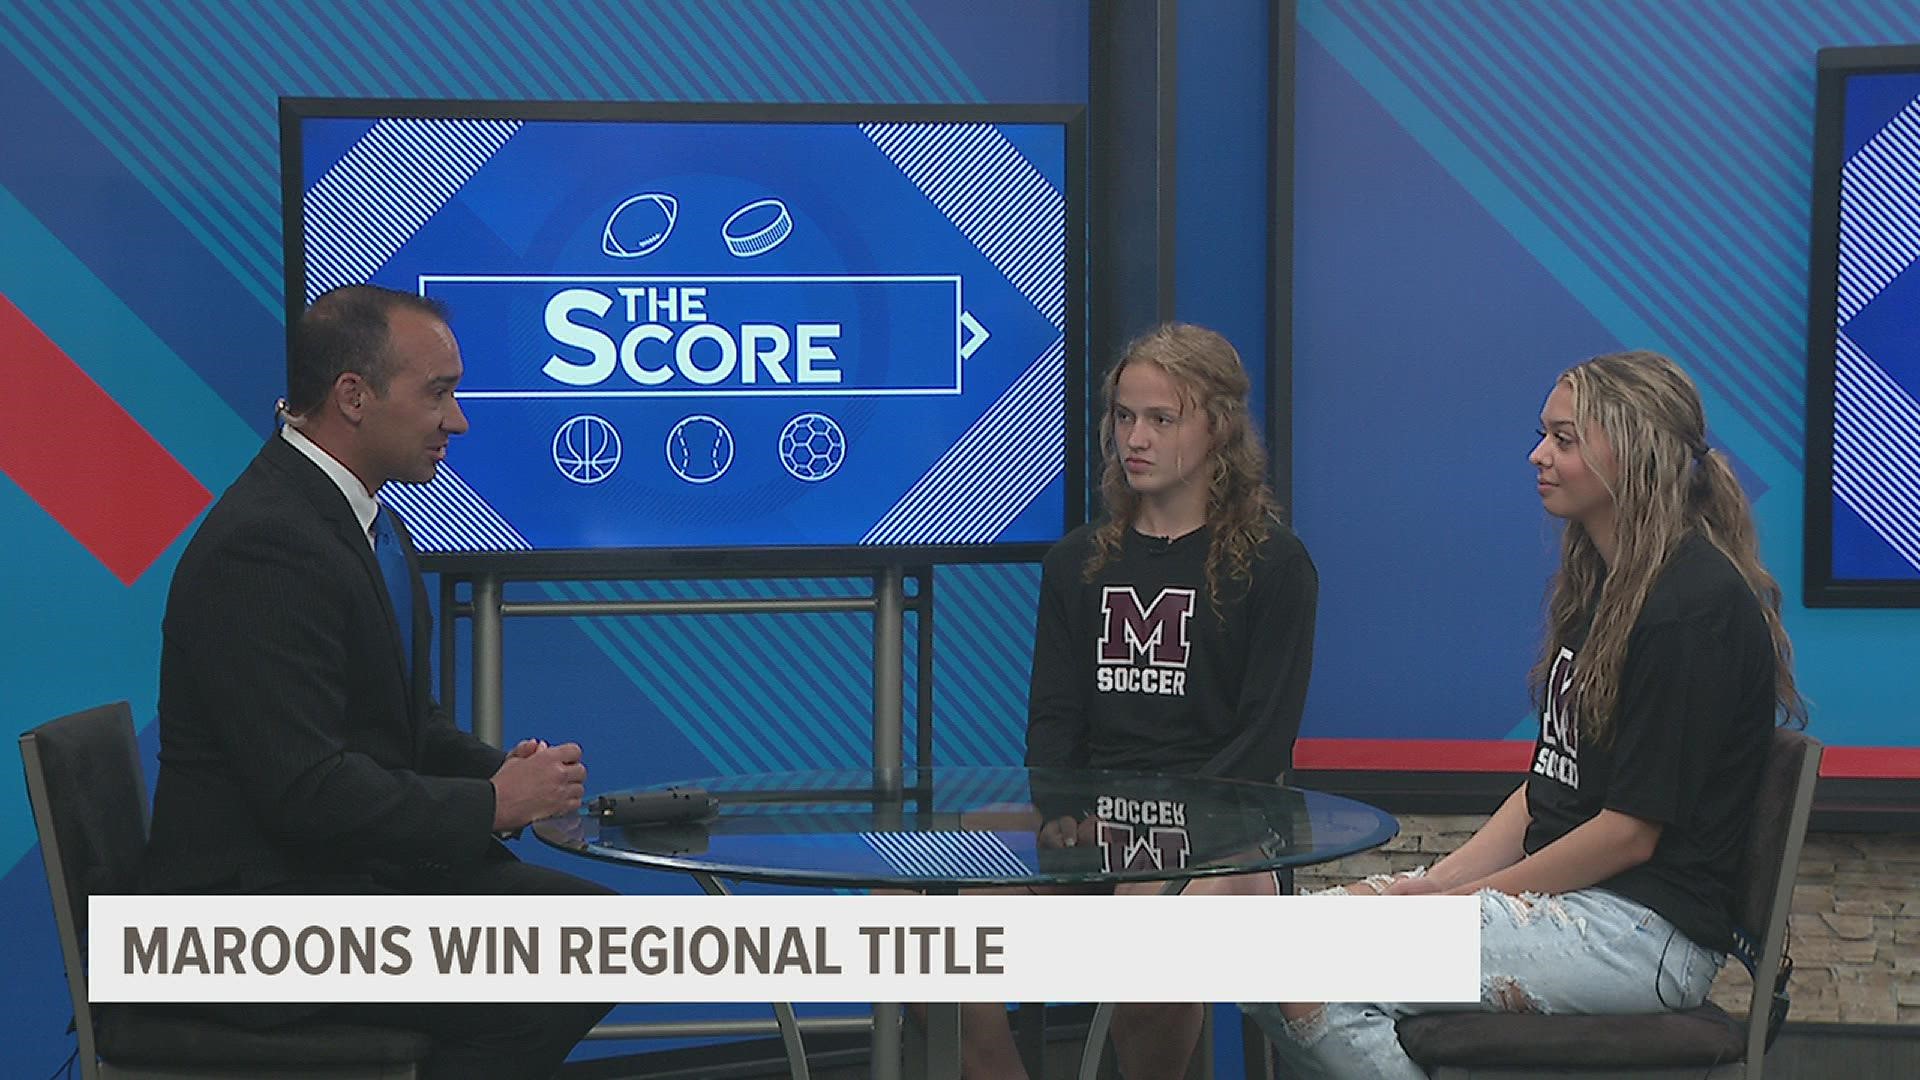 Moline Girls Soccer Team won their first Regional Championship in 8 years. Hear why the Maroons are playing so well this season.